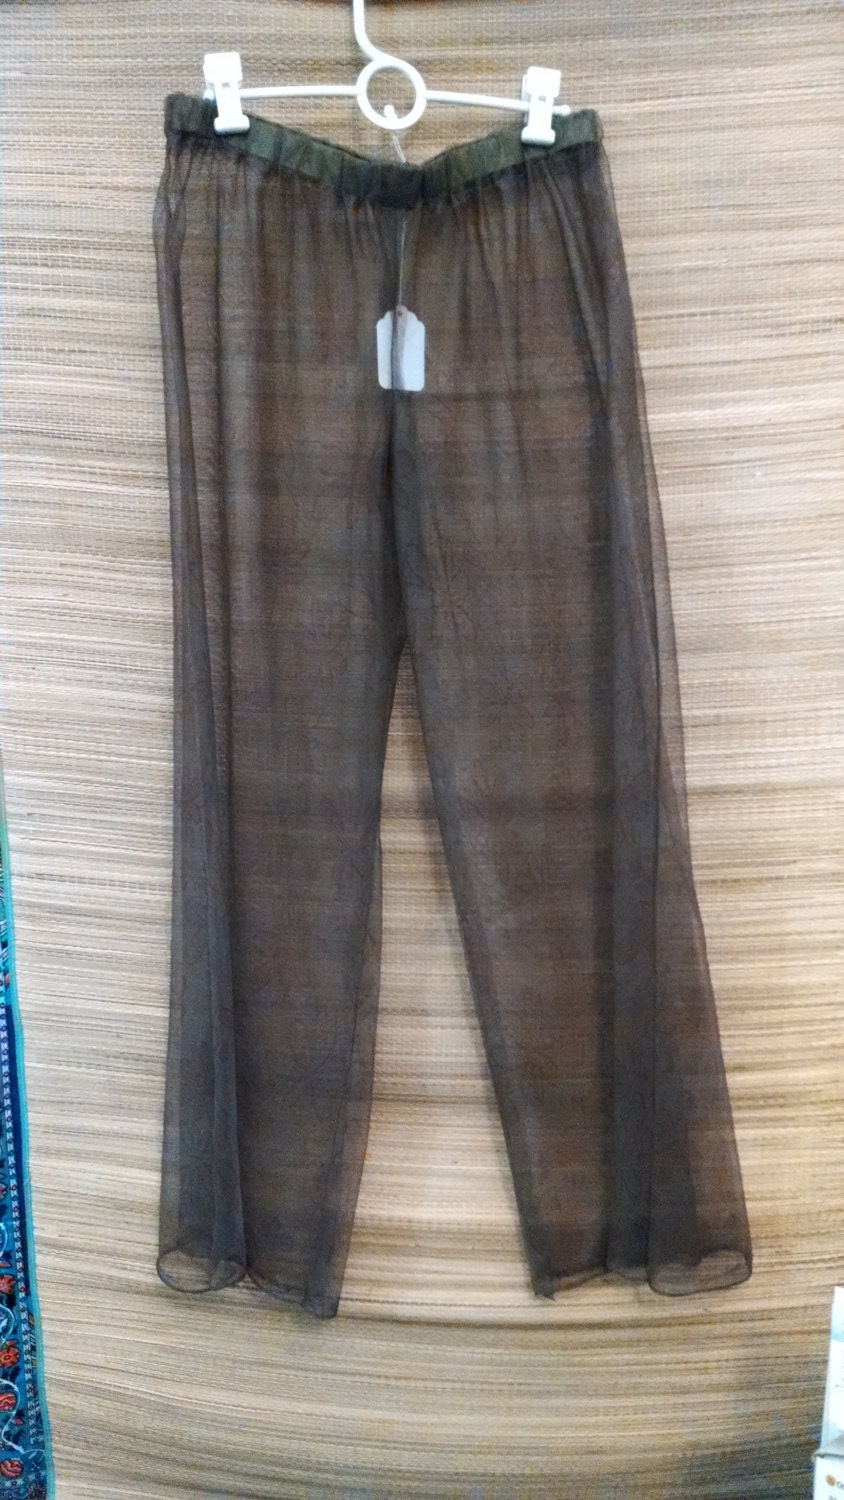 Beach Cover-up Pants Sheer Brown and Green - Etsy